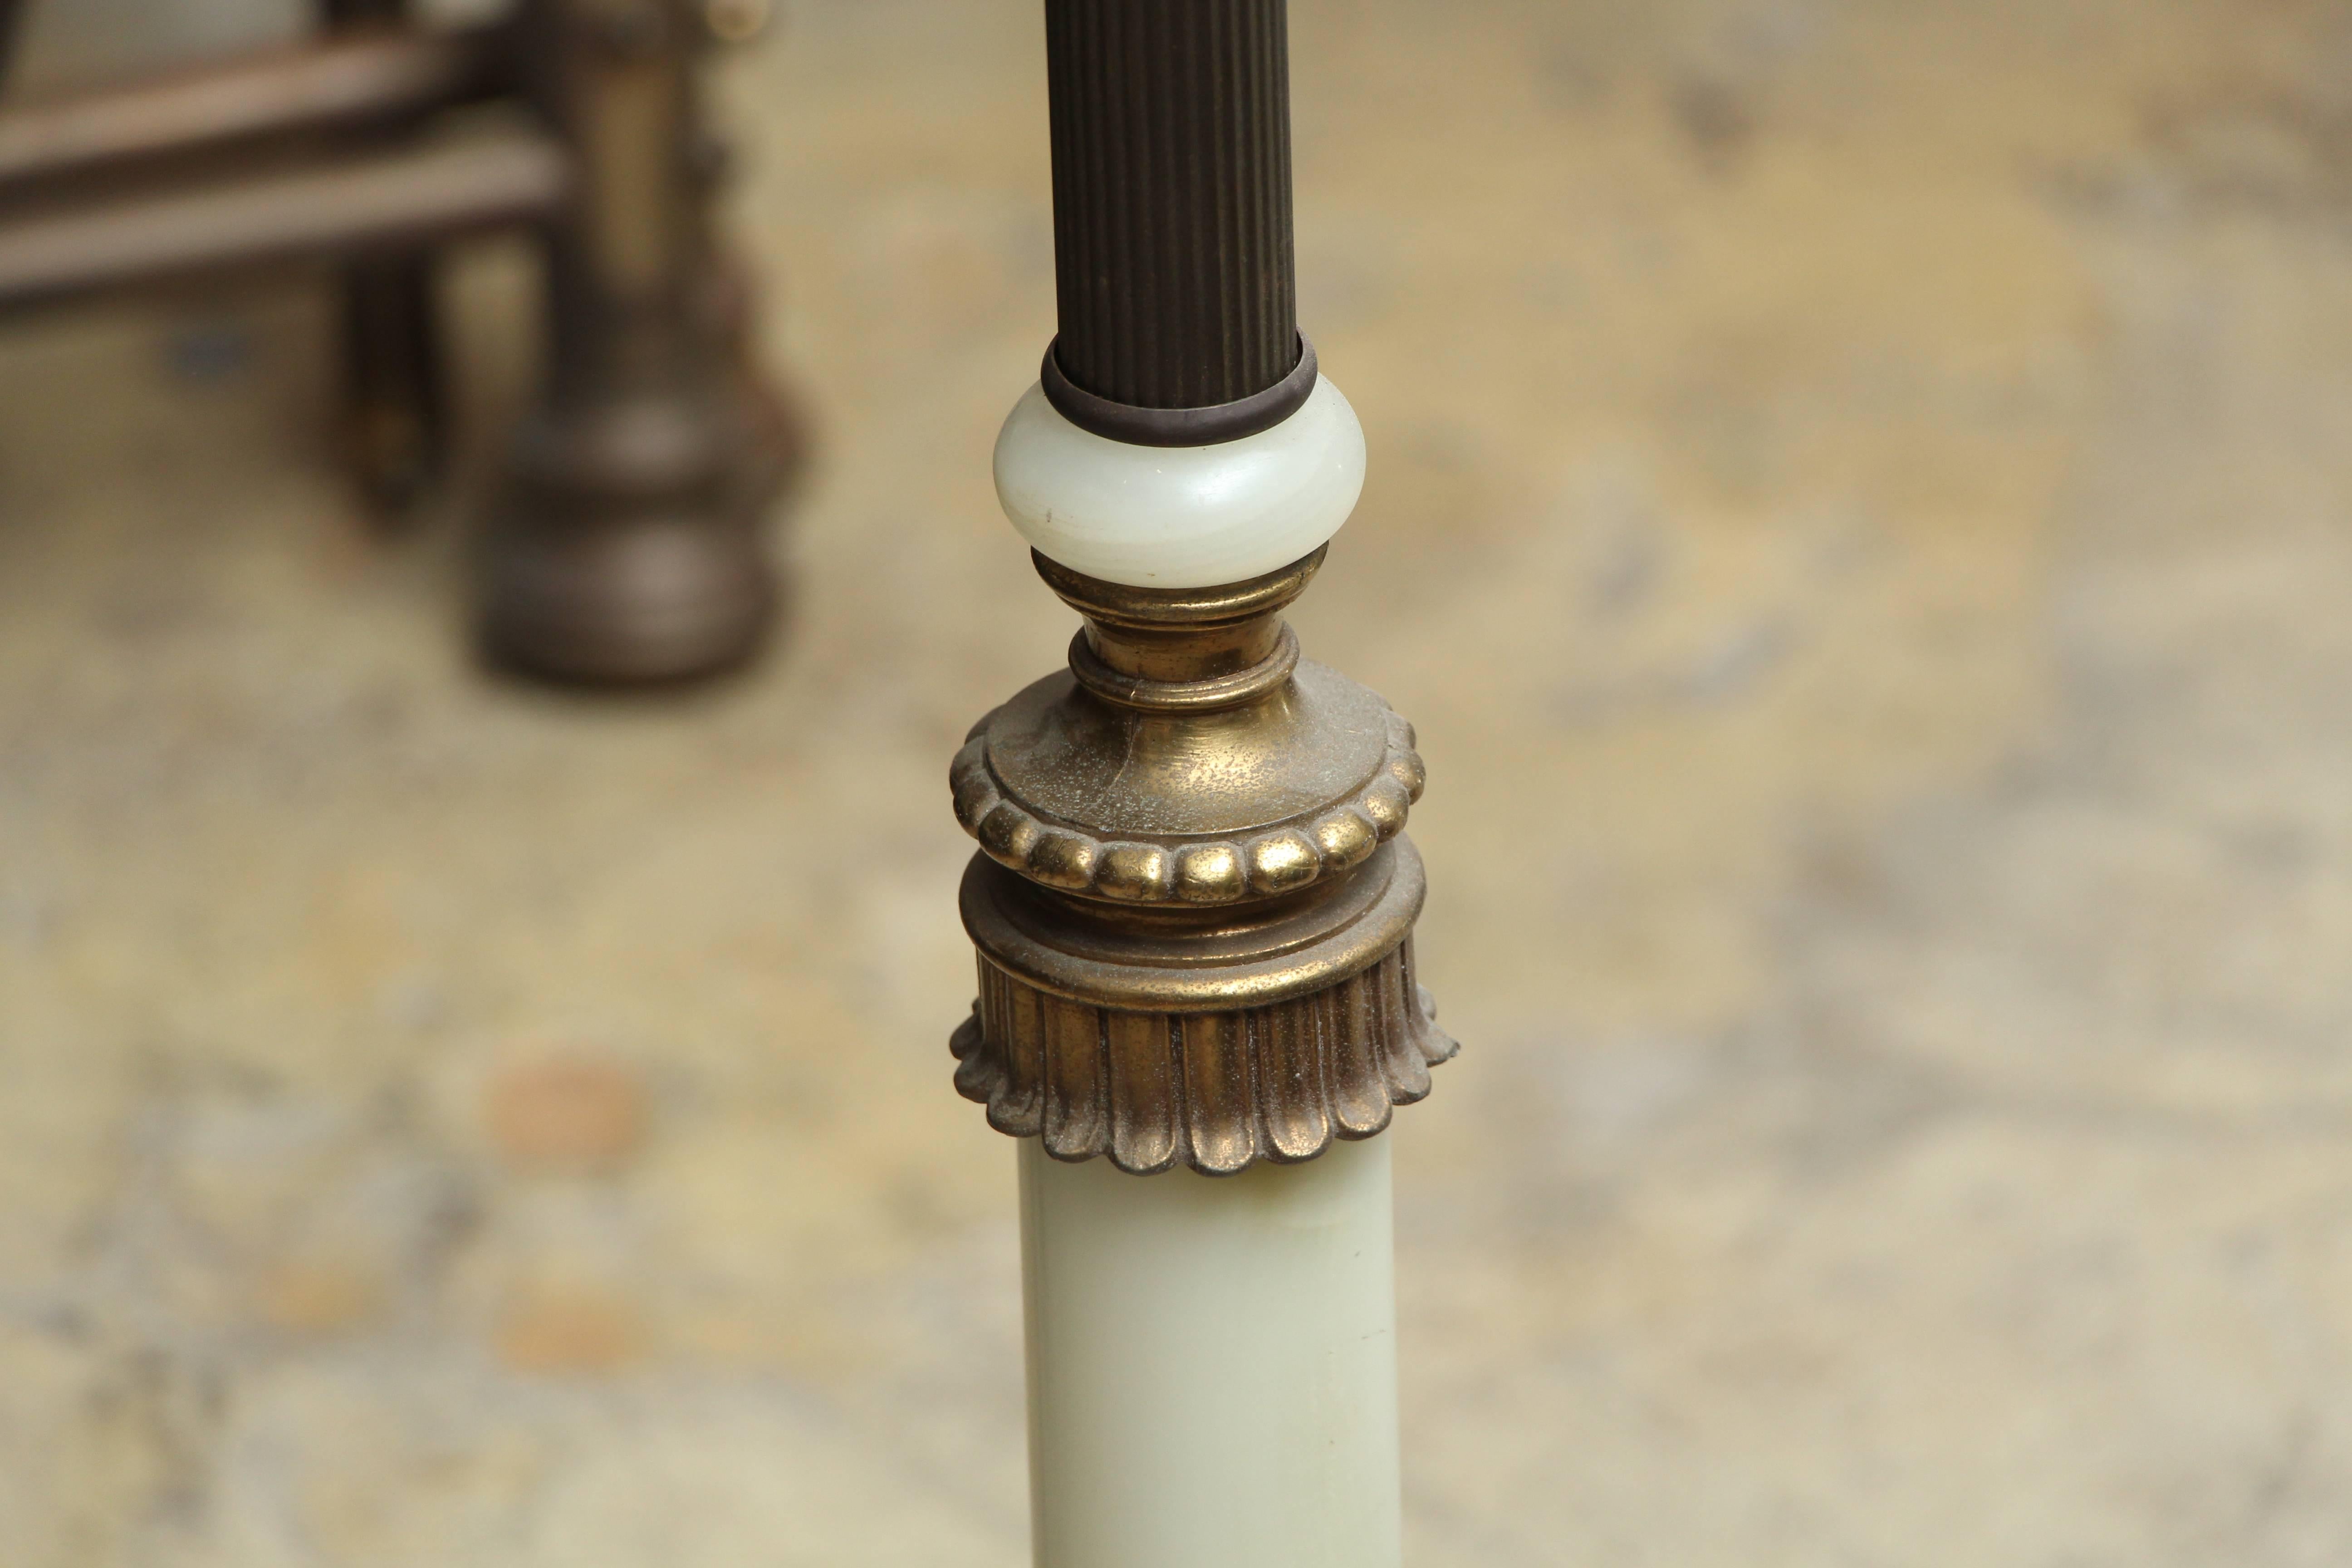 Cast 1930s Art Nouveau Torchiere Floor Lamp with Marble Base and Fluted Center Column